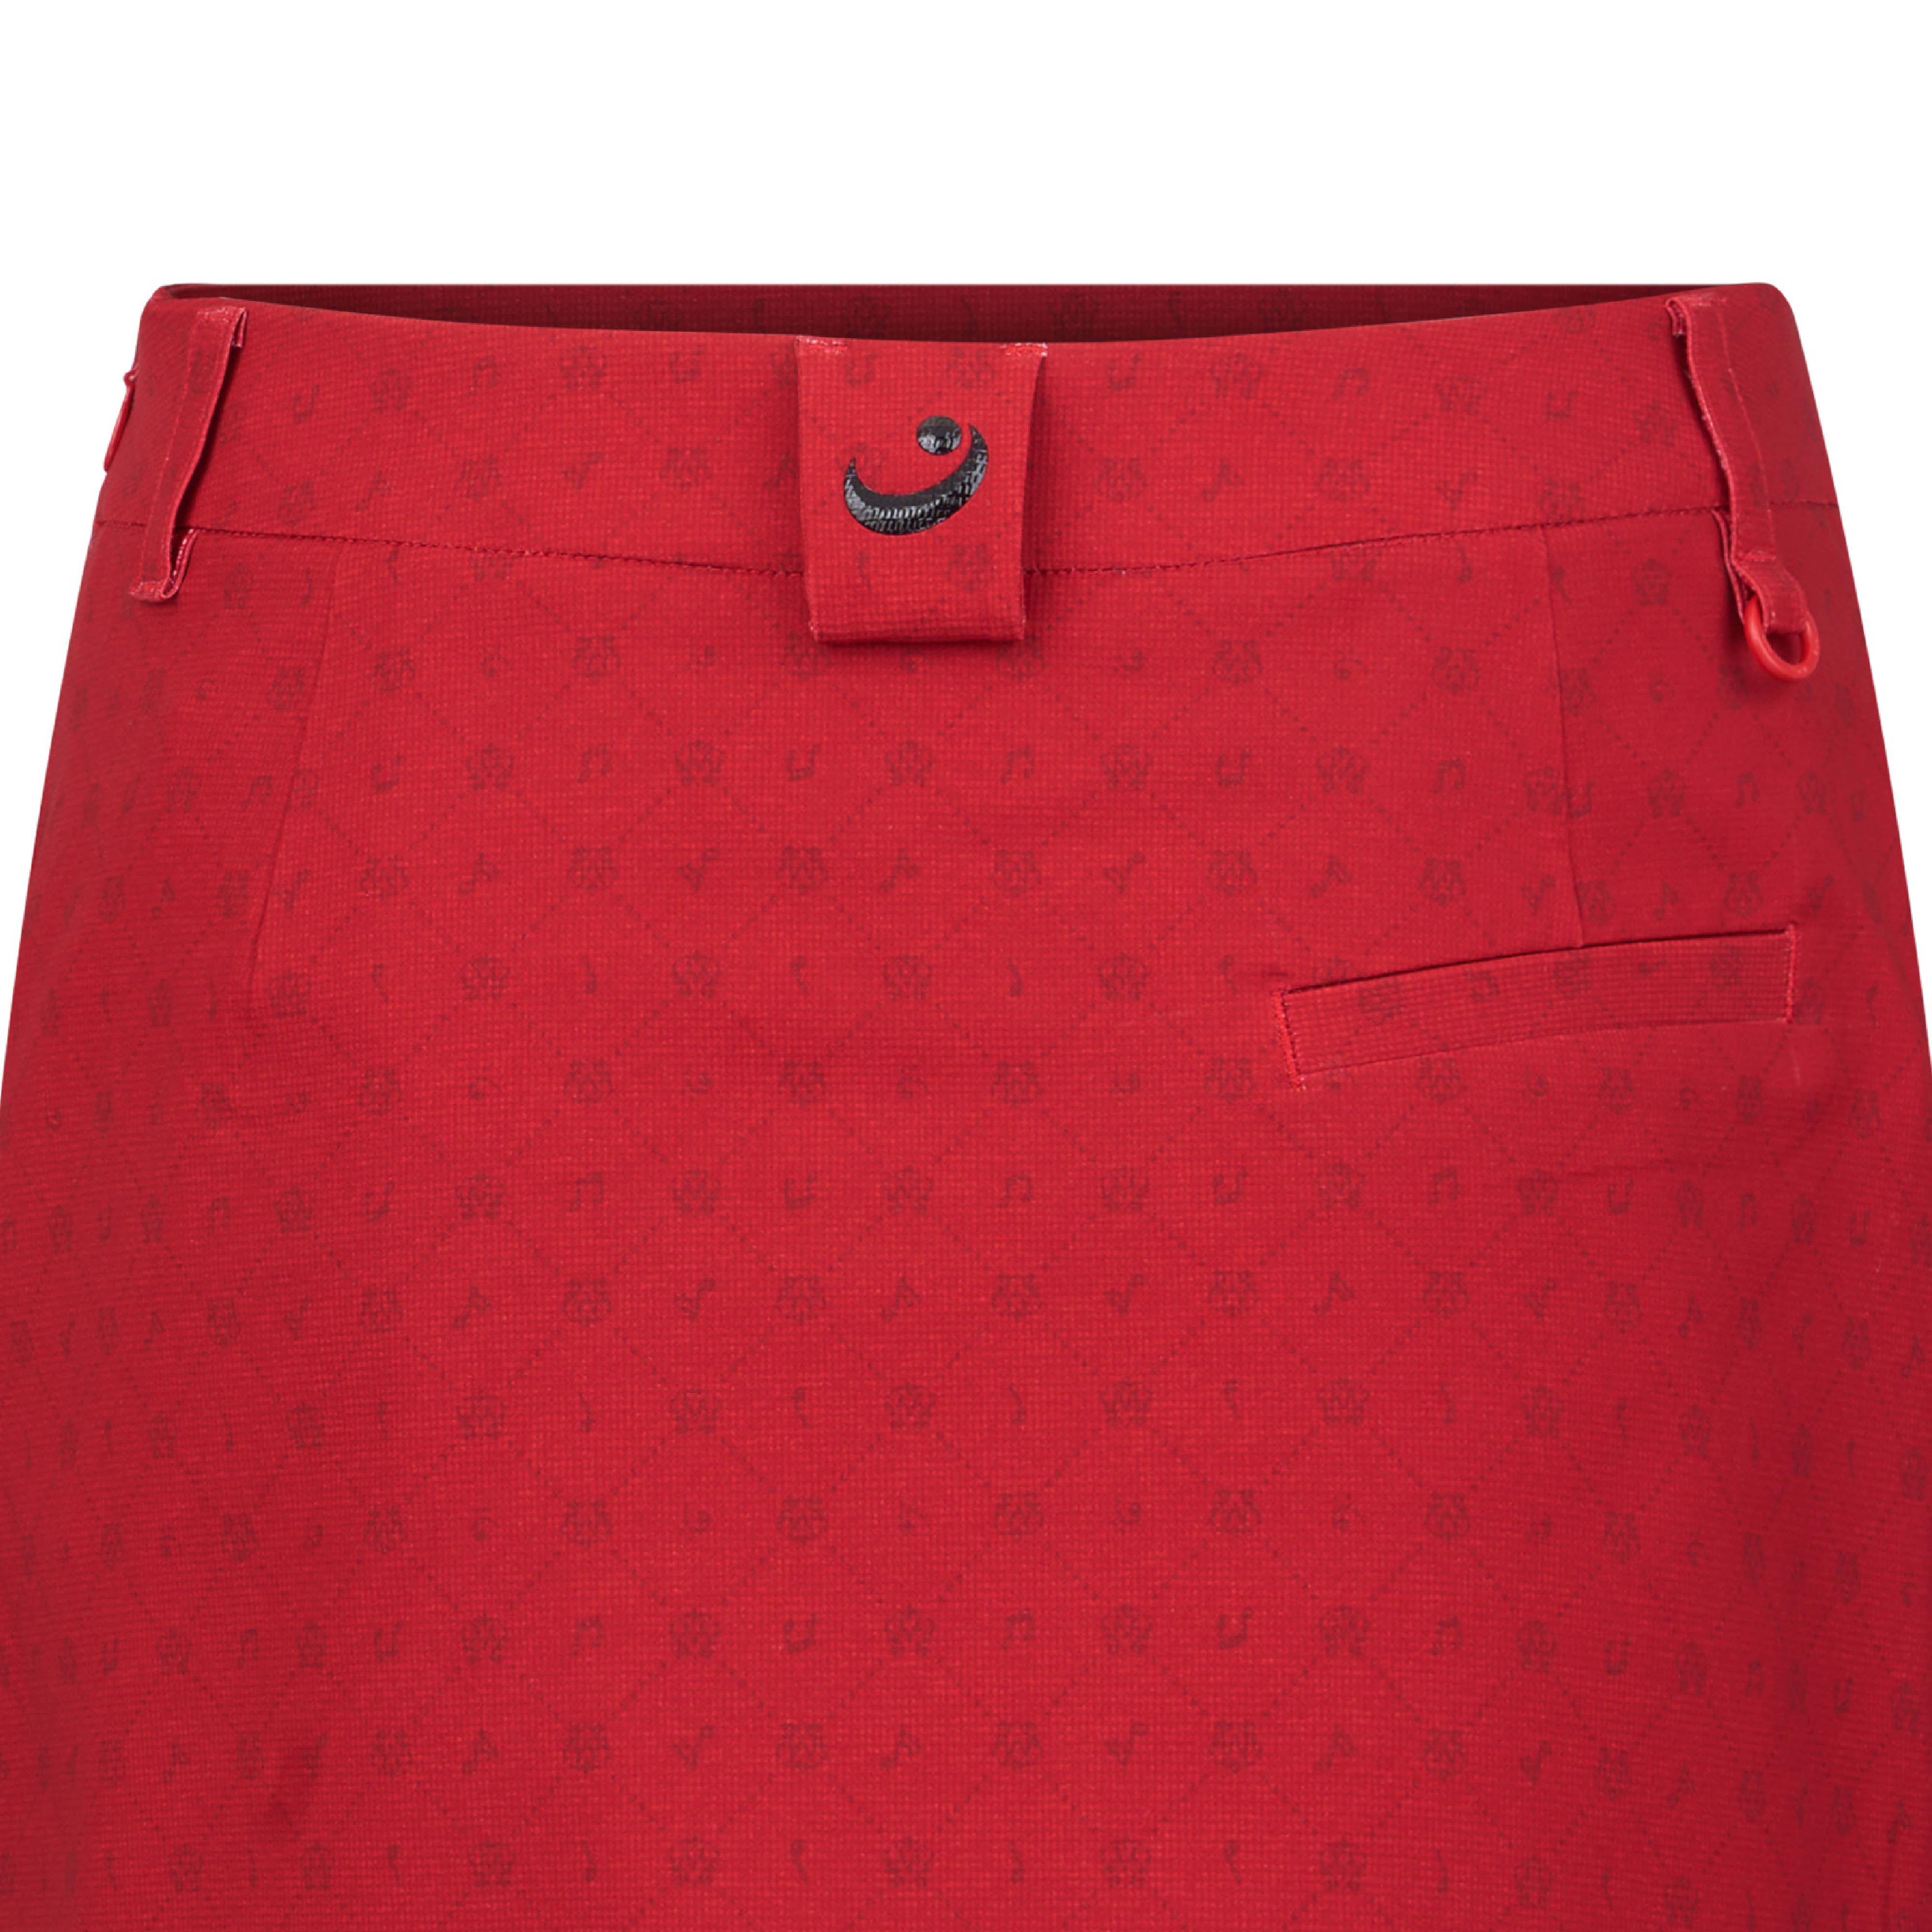 Layla Skirt - Red